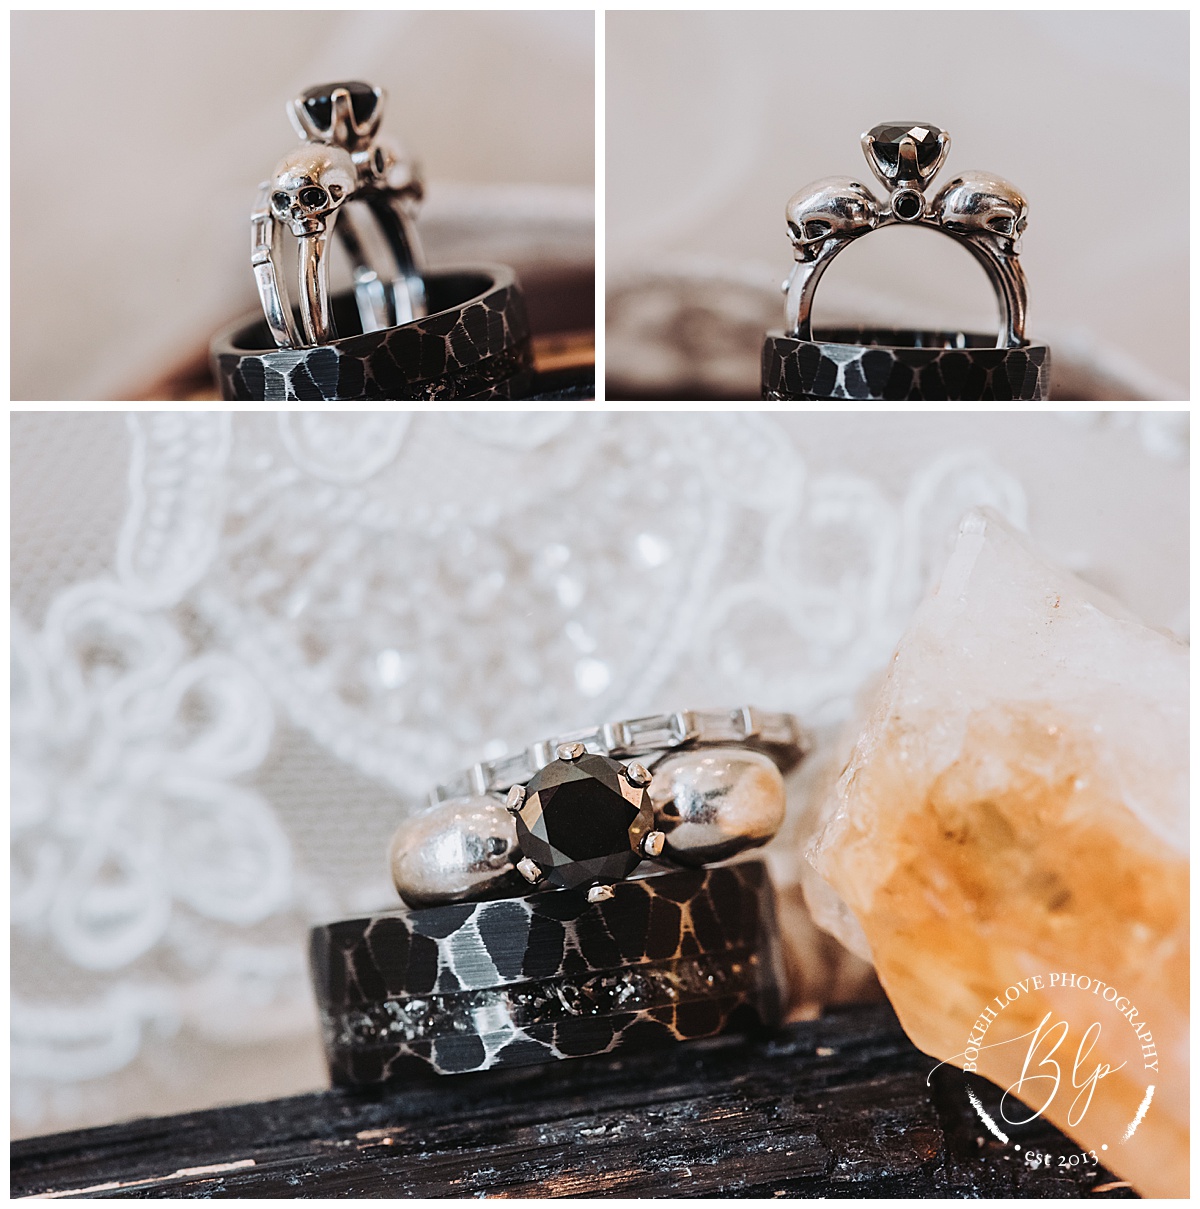 Harvest Chic Wedding at Renault, Macro photography of wedding rings with skulls.